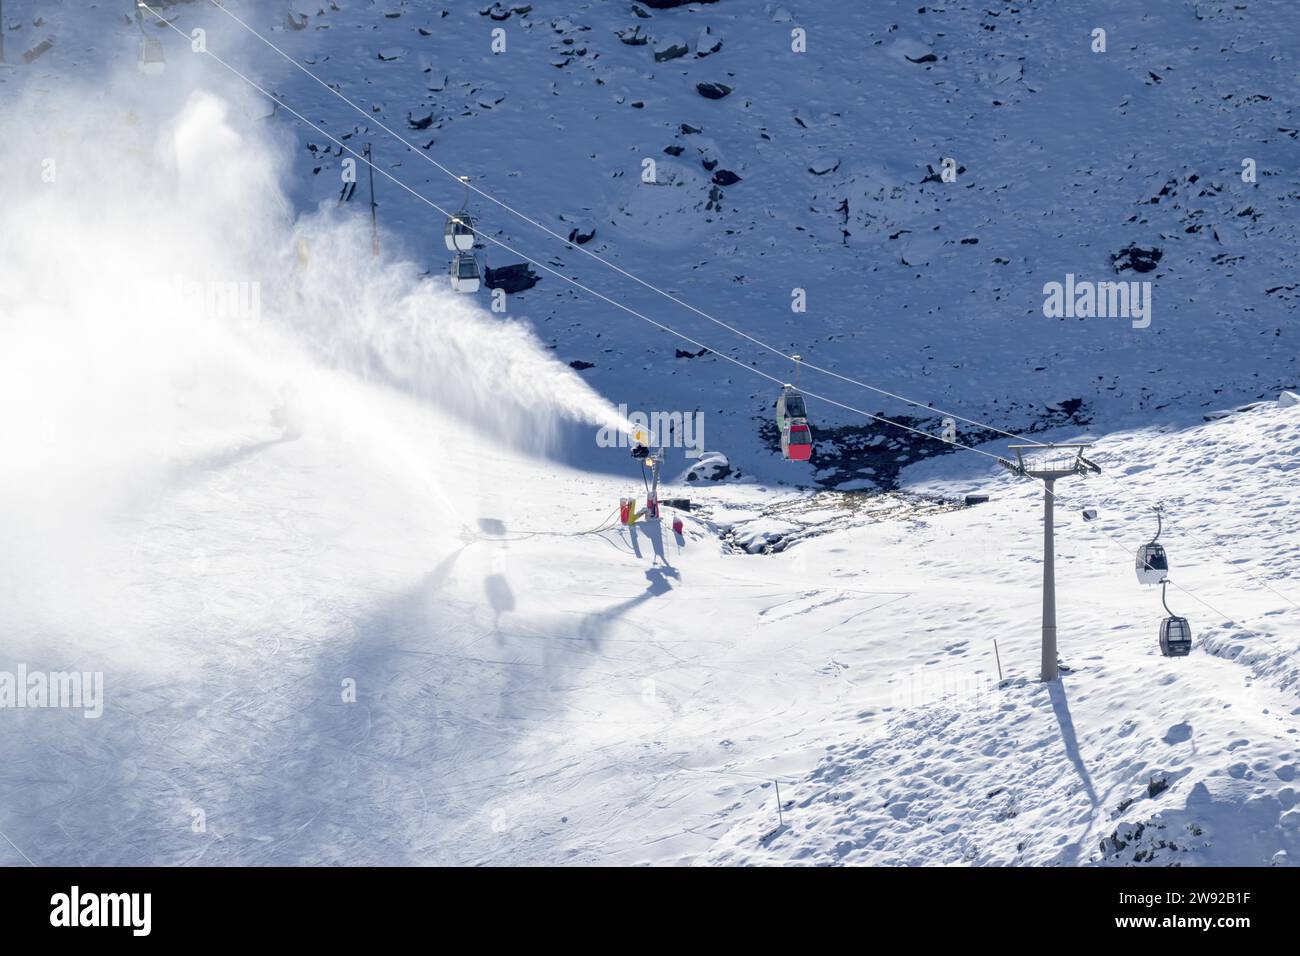 Snow cannons, spreading snow on the slopes next to the cable cars in sierra nevada ski resort Stock Photo